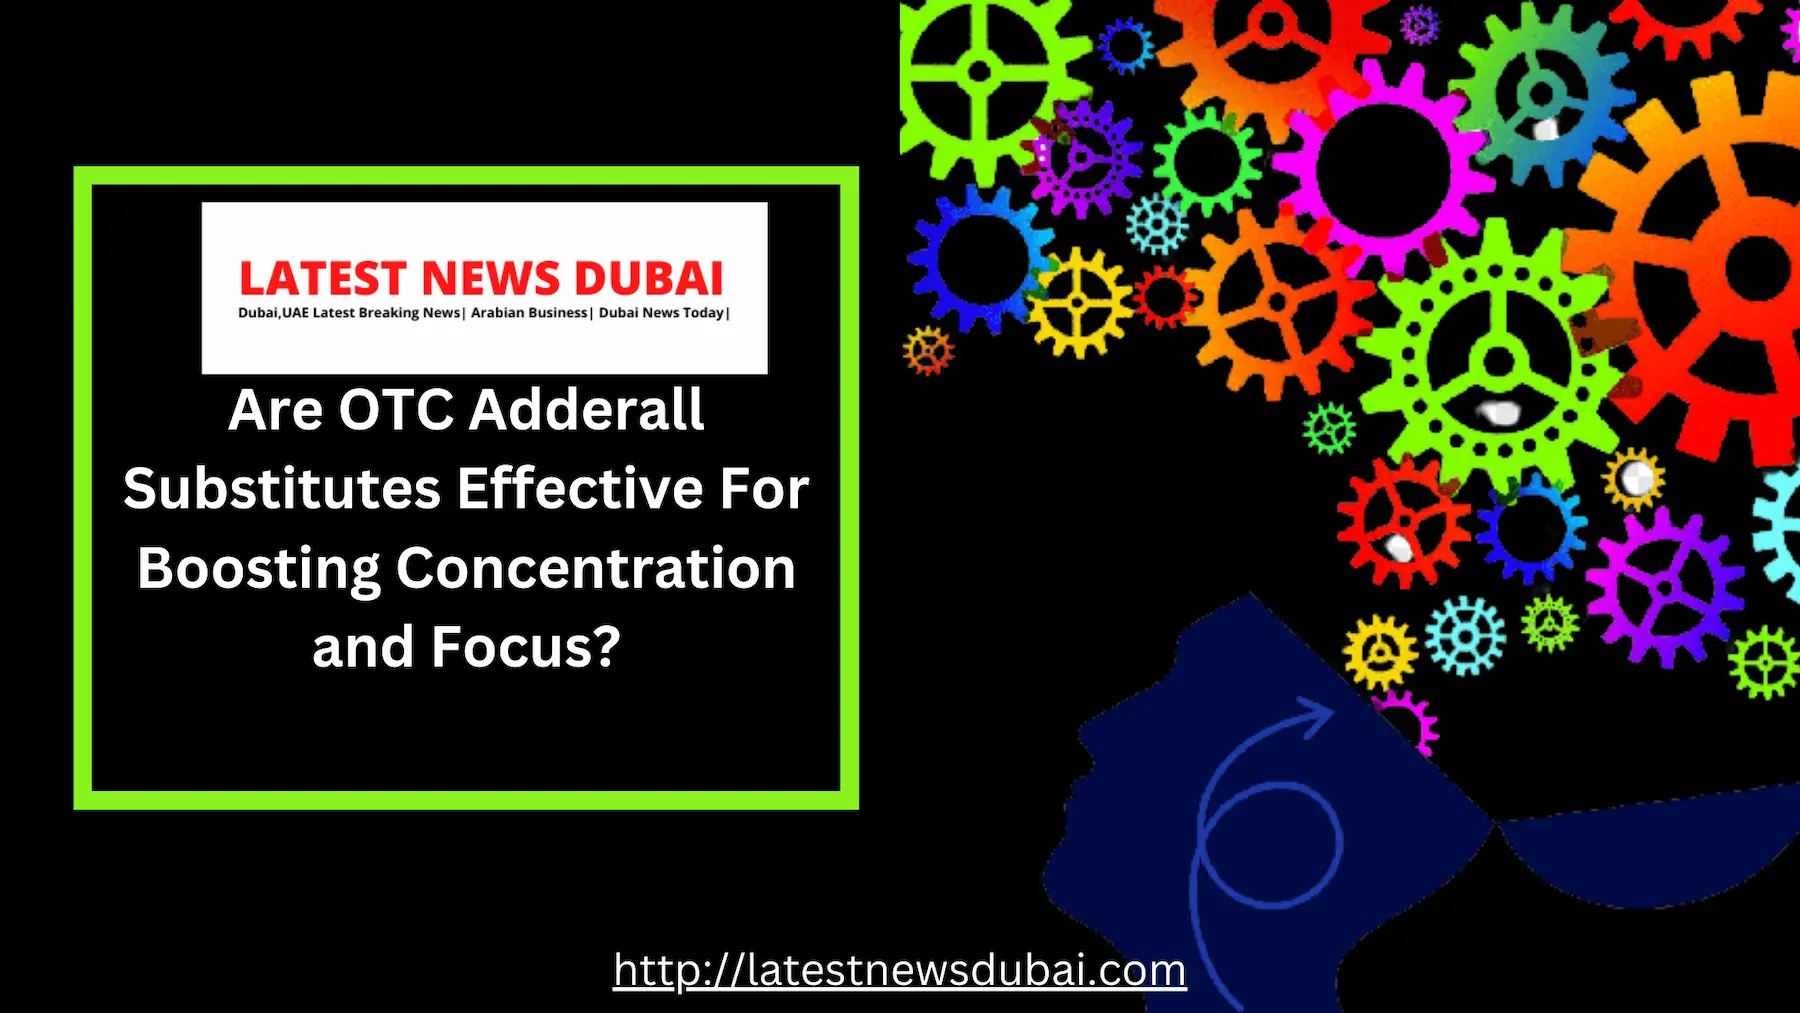 Are OTC Adderall Substitutes Effective For Boosting Concentration